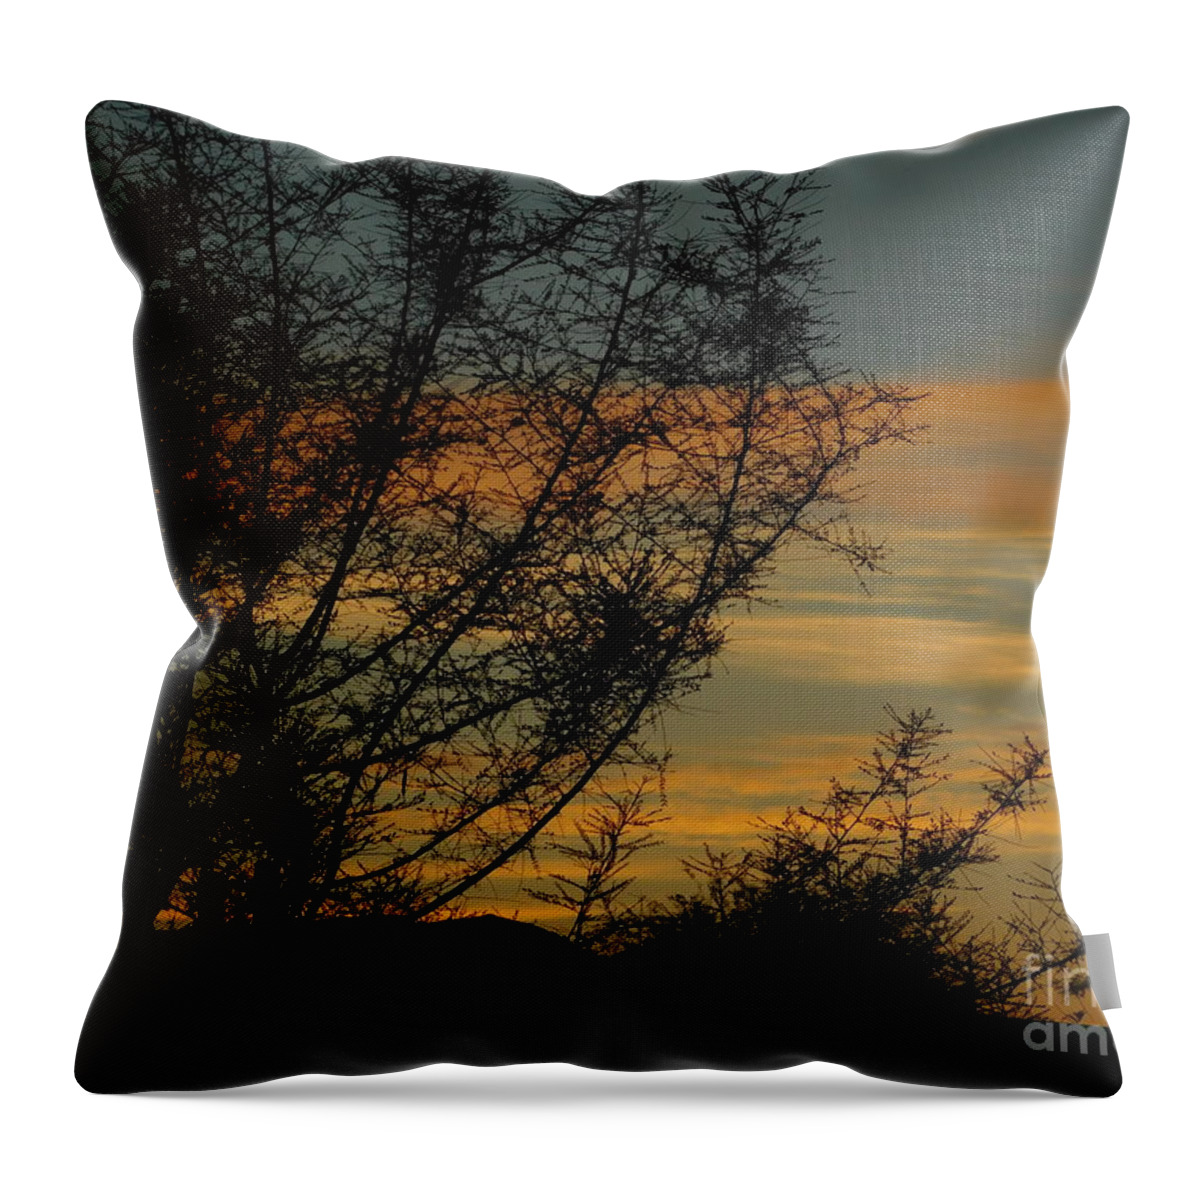 Sunset Throw Pillow featuring the photograph Solitude by Chris Tarpening